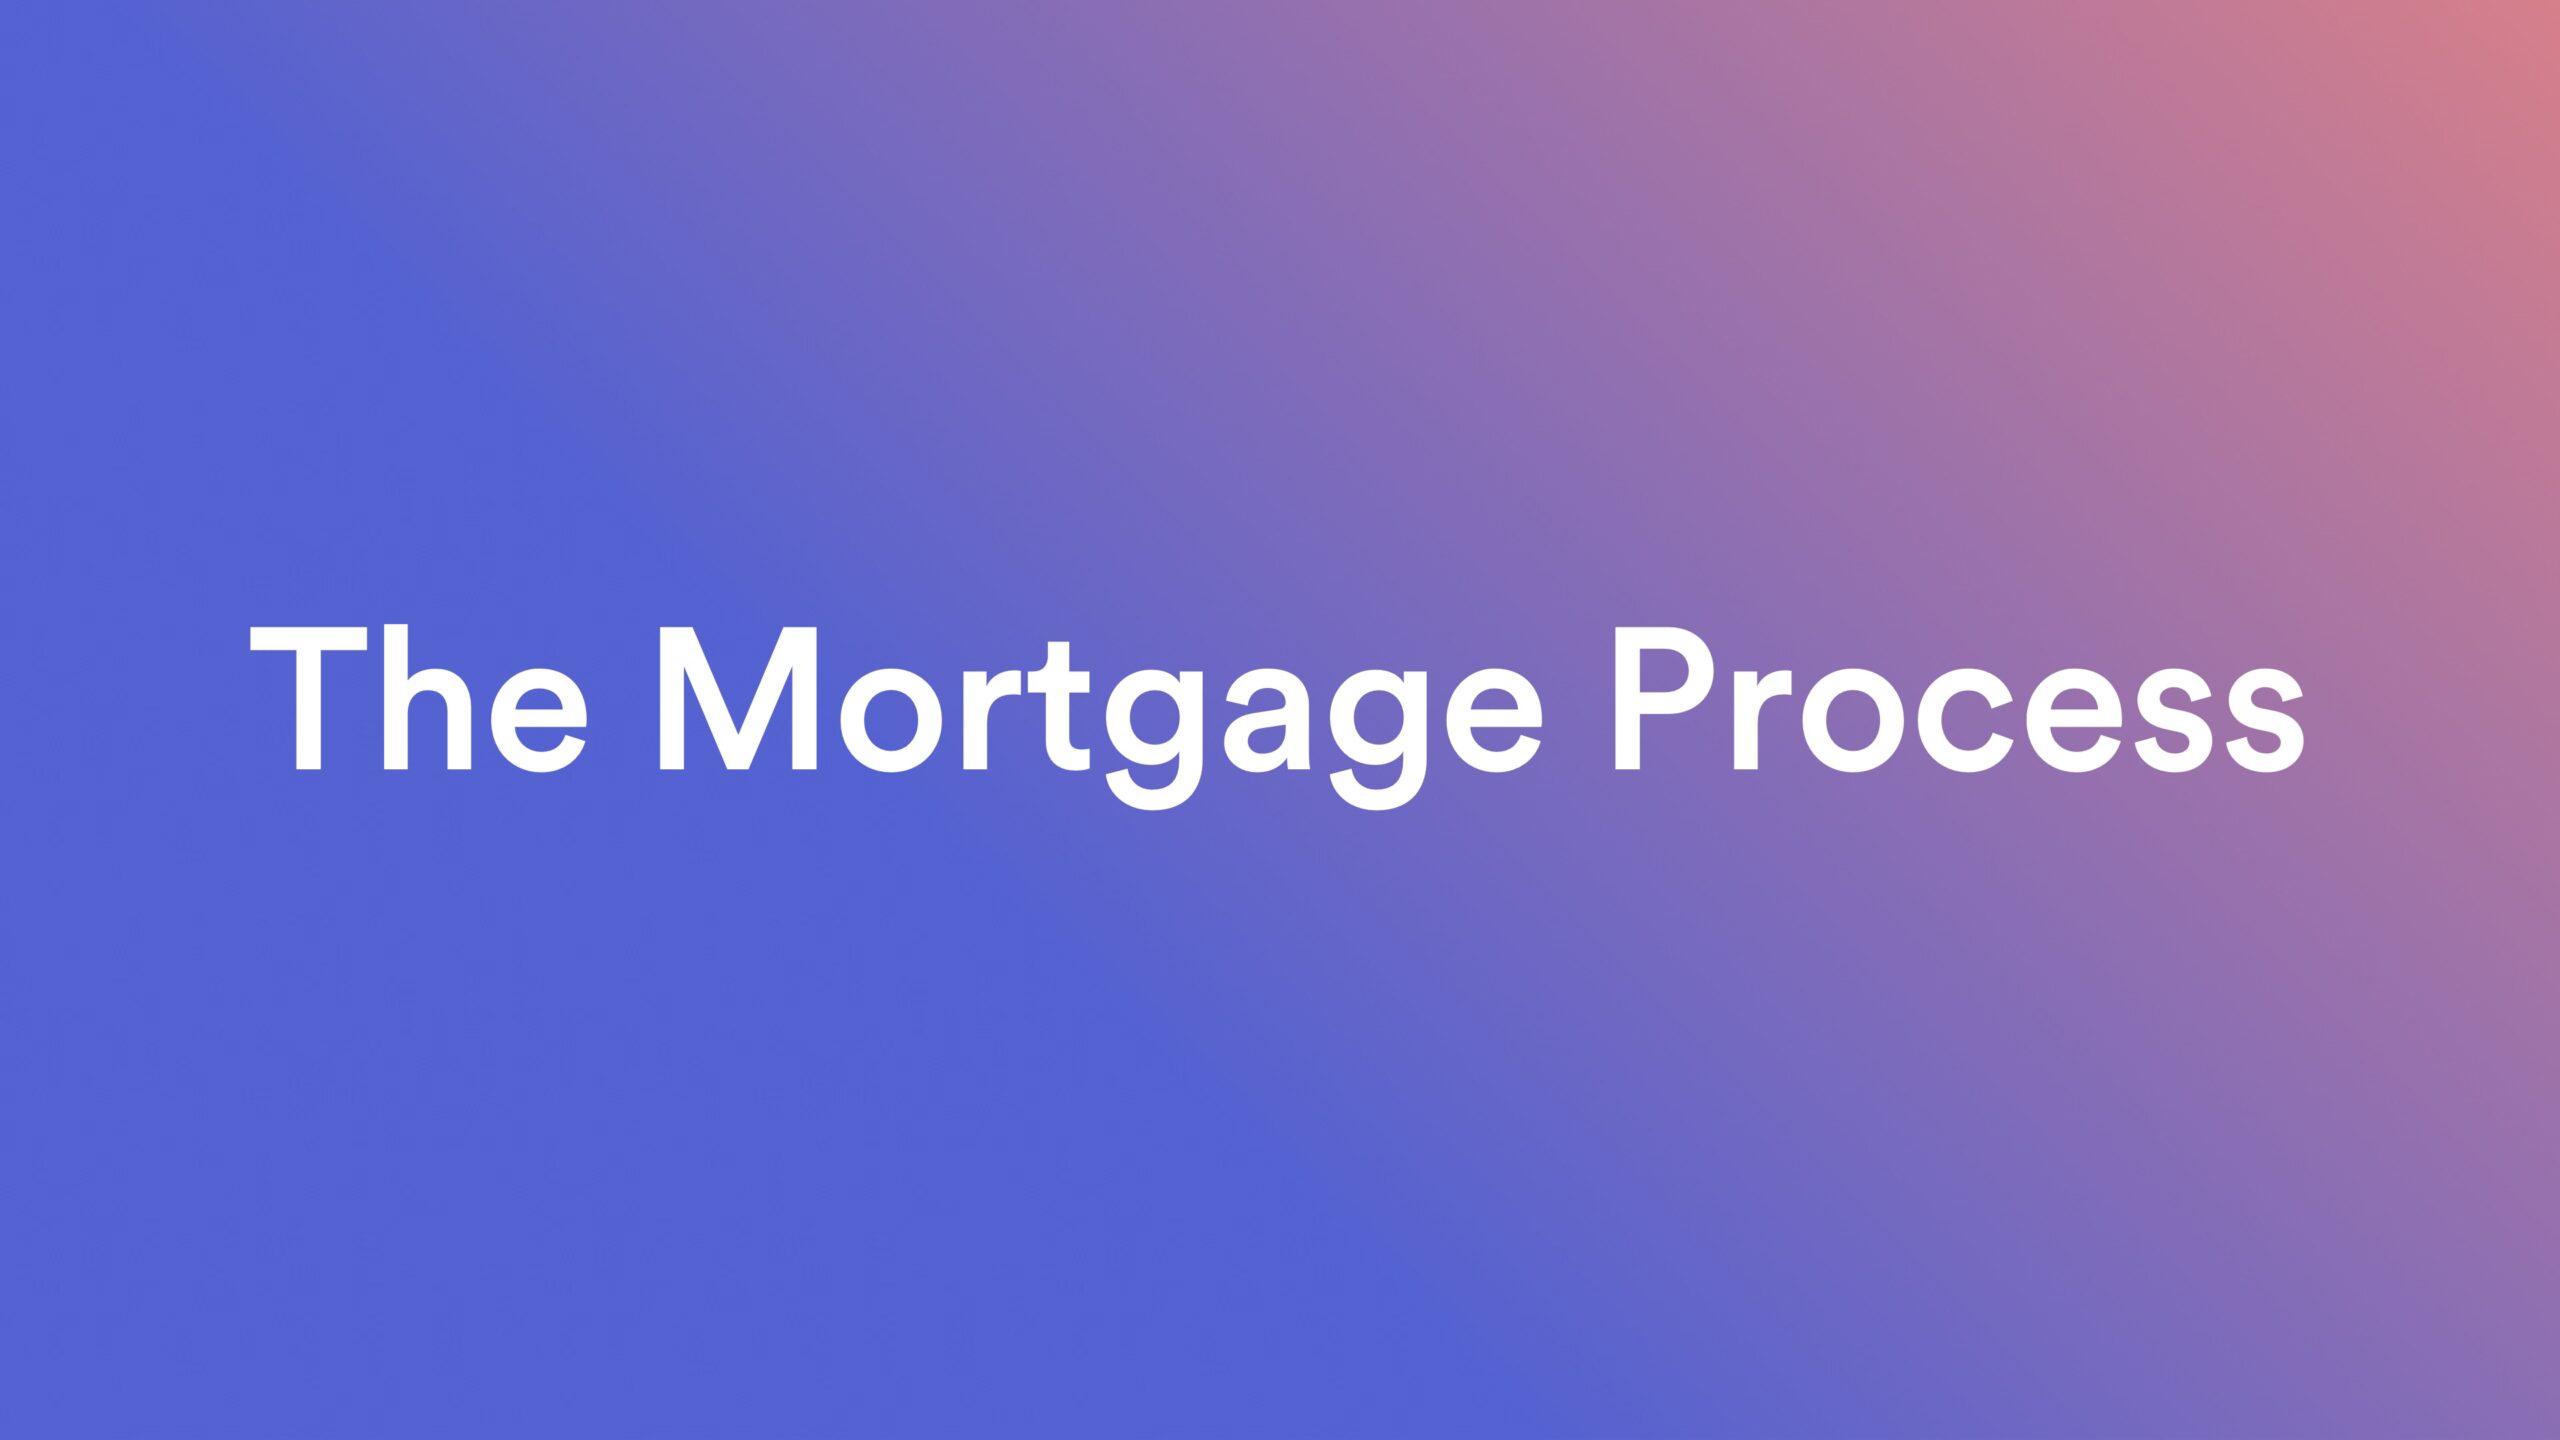 Graphic: The mortgage process